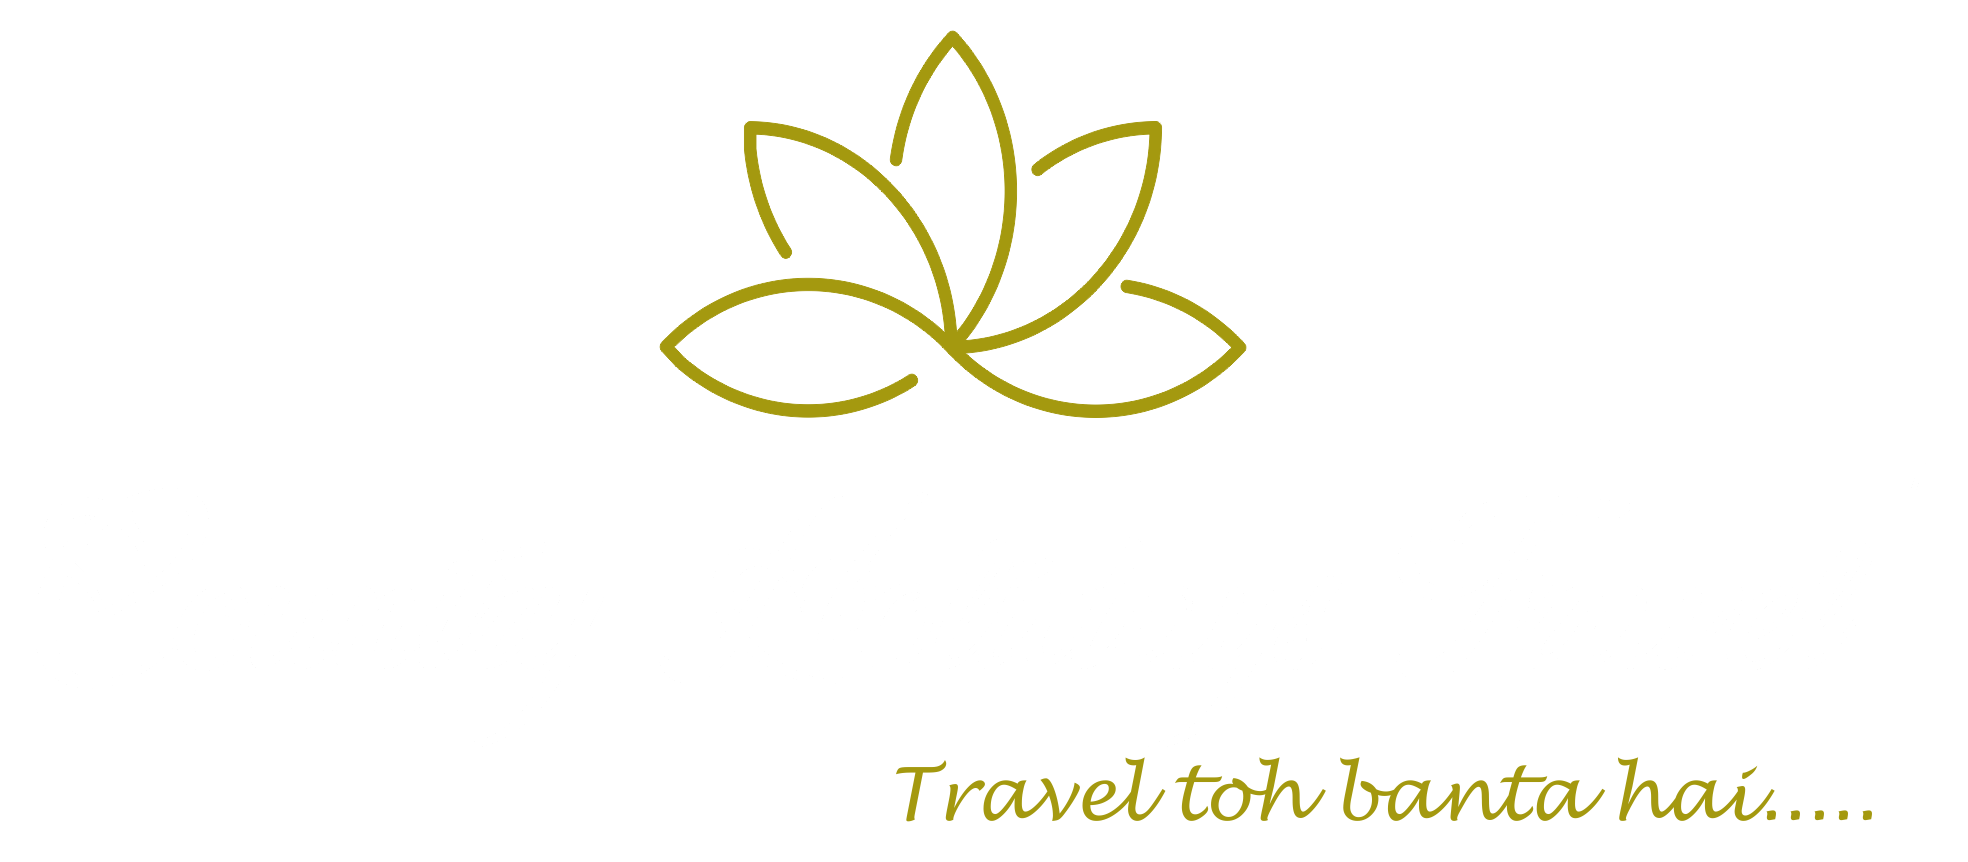 country holidays travel